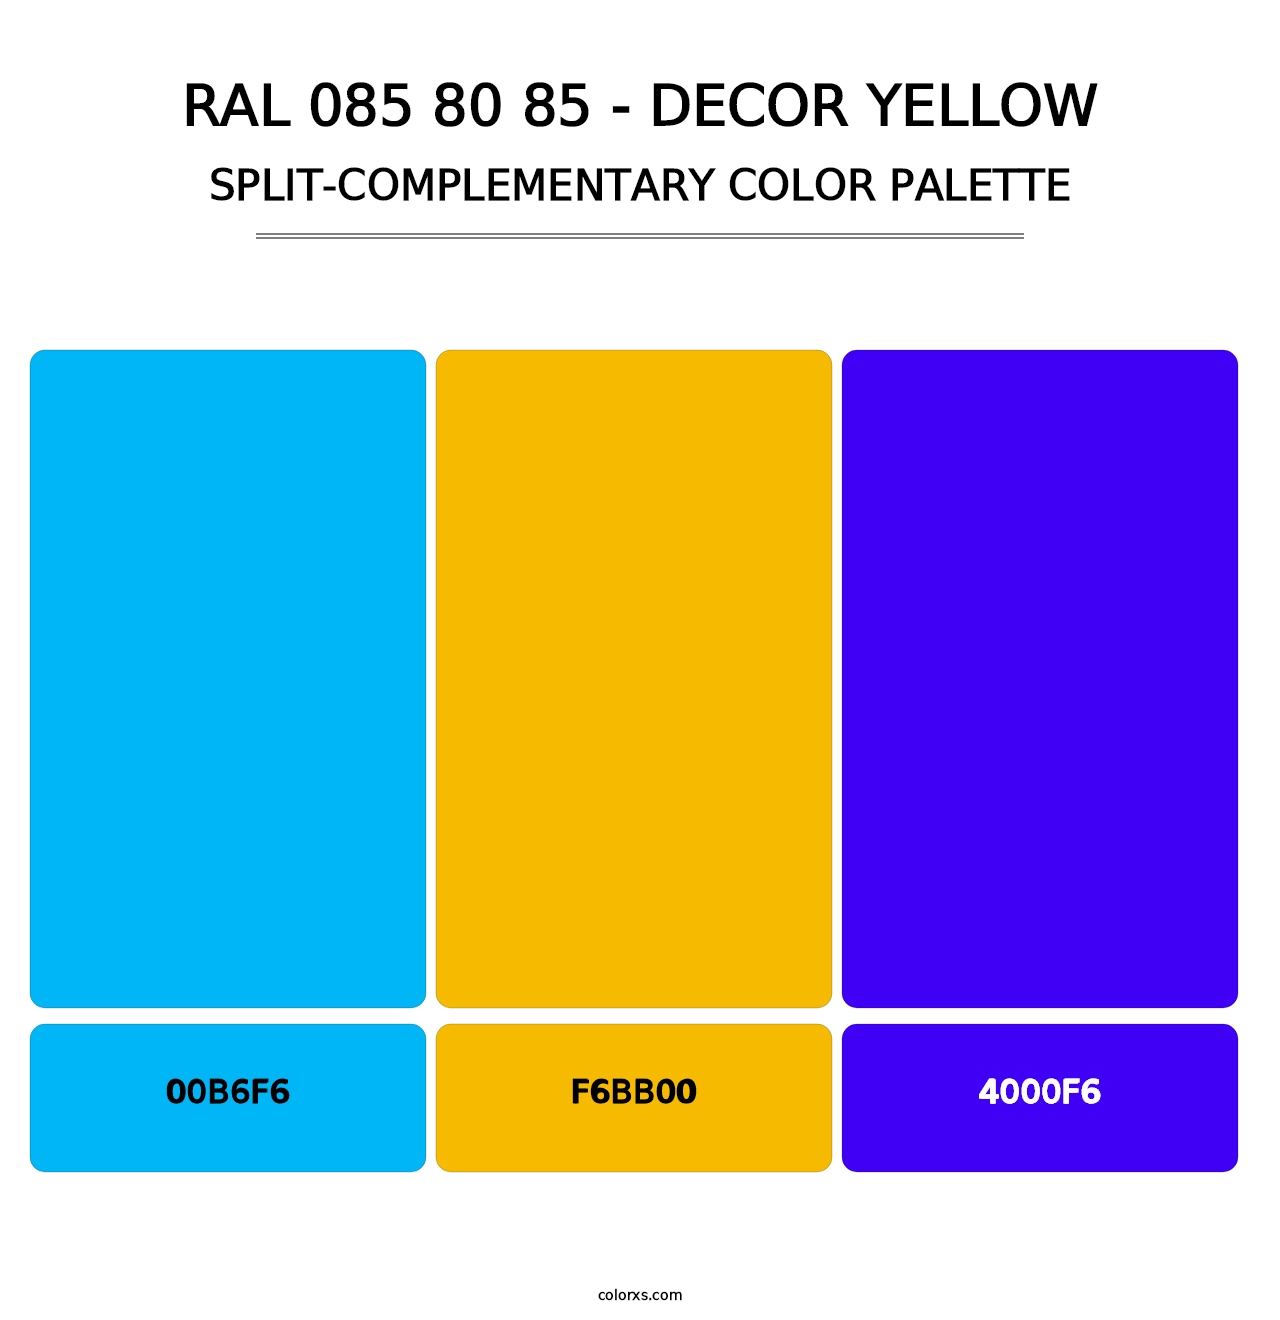 RAL 085 80 85 - Decor Yellow - Split-Complementary Color Palette